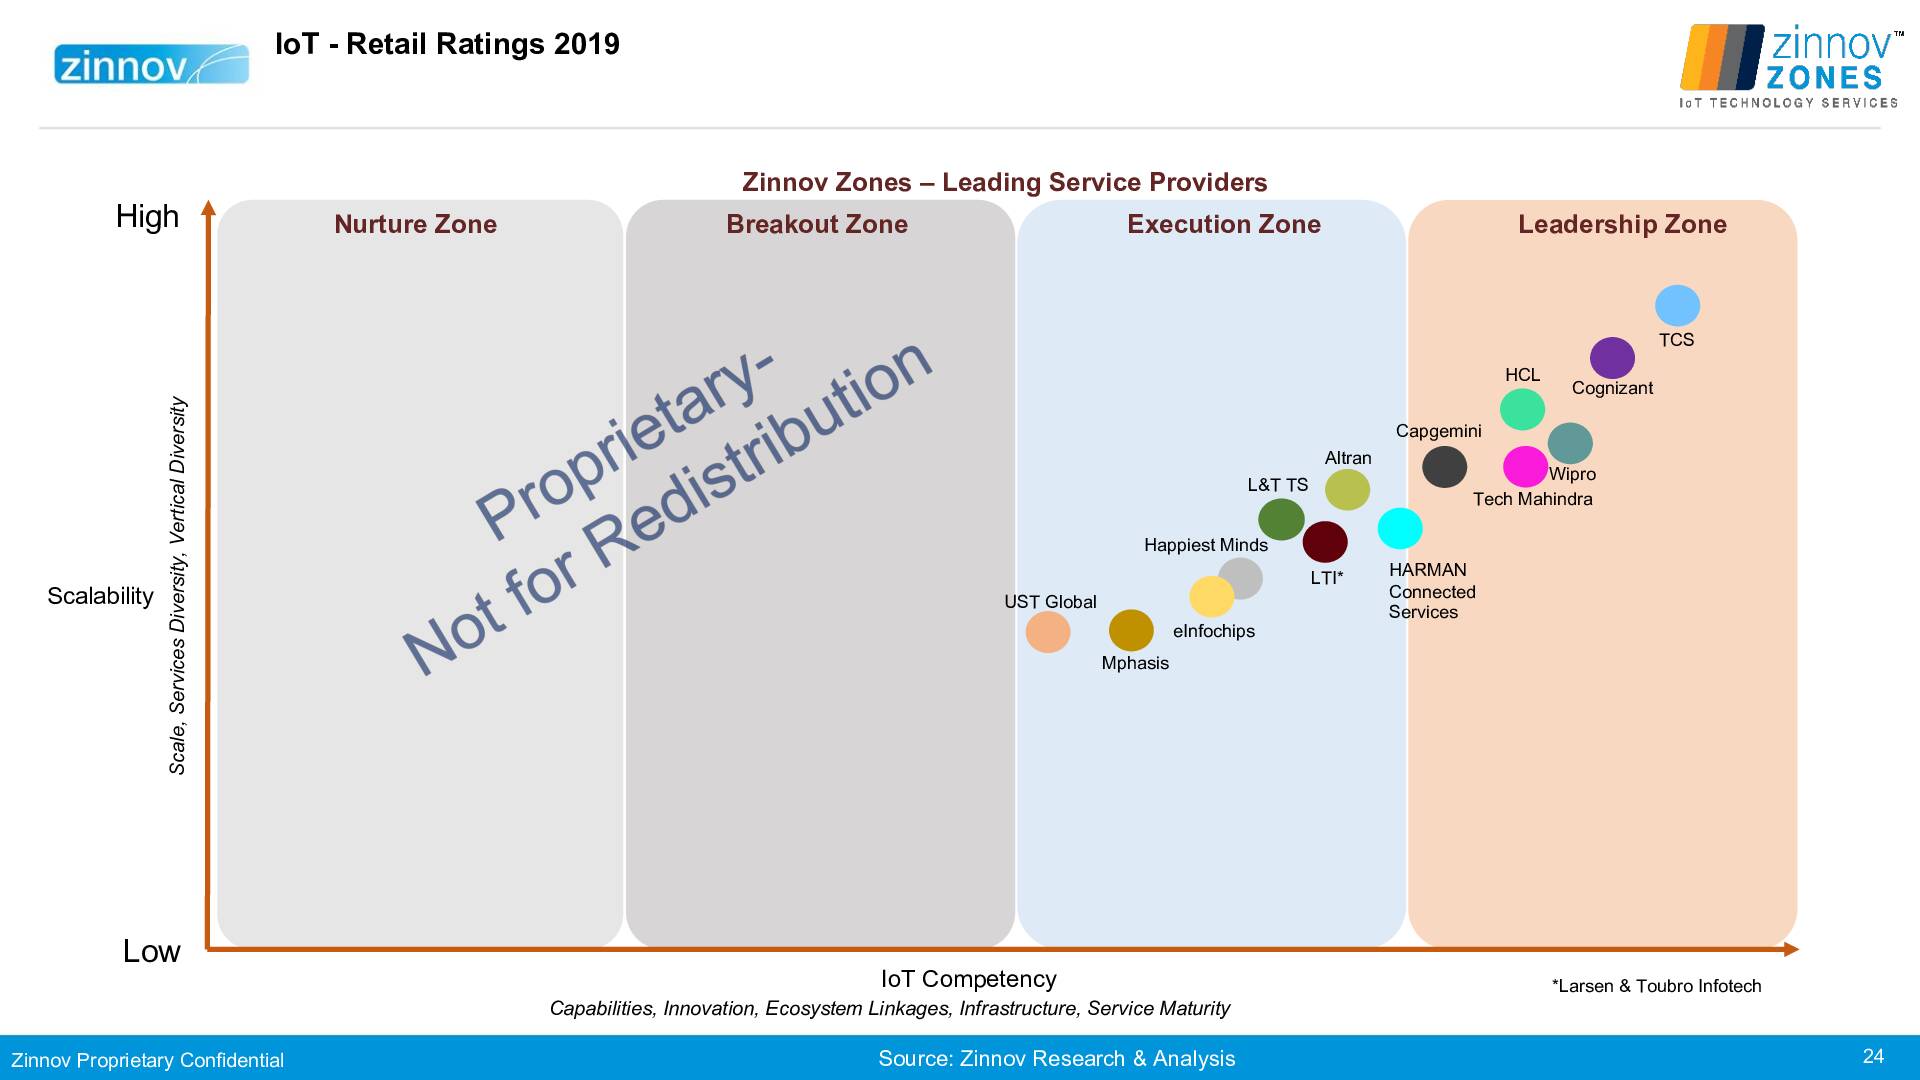 Zinnov Zones Iot Technology Services 2019 Ratings24